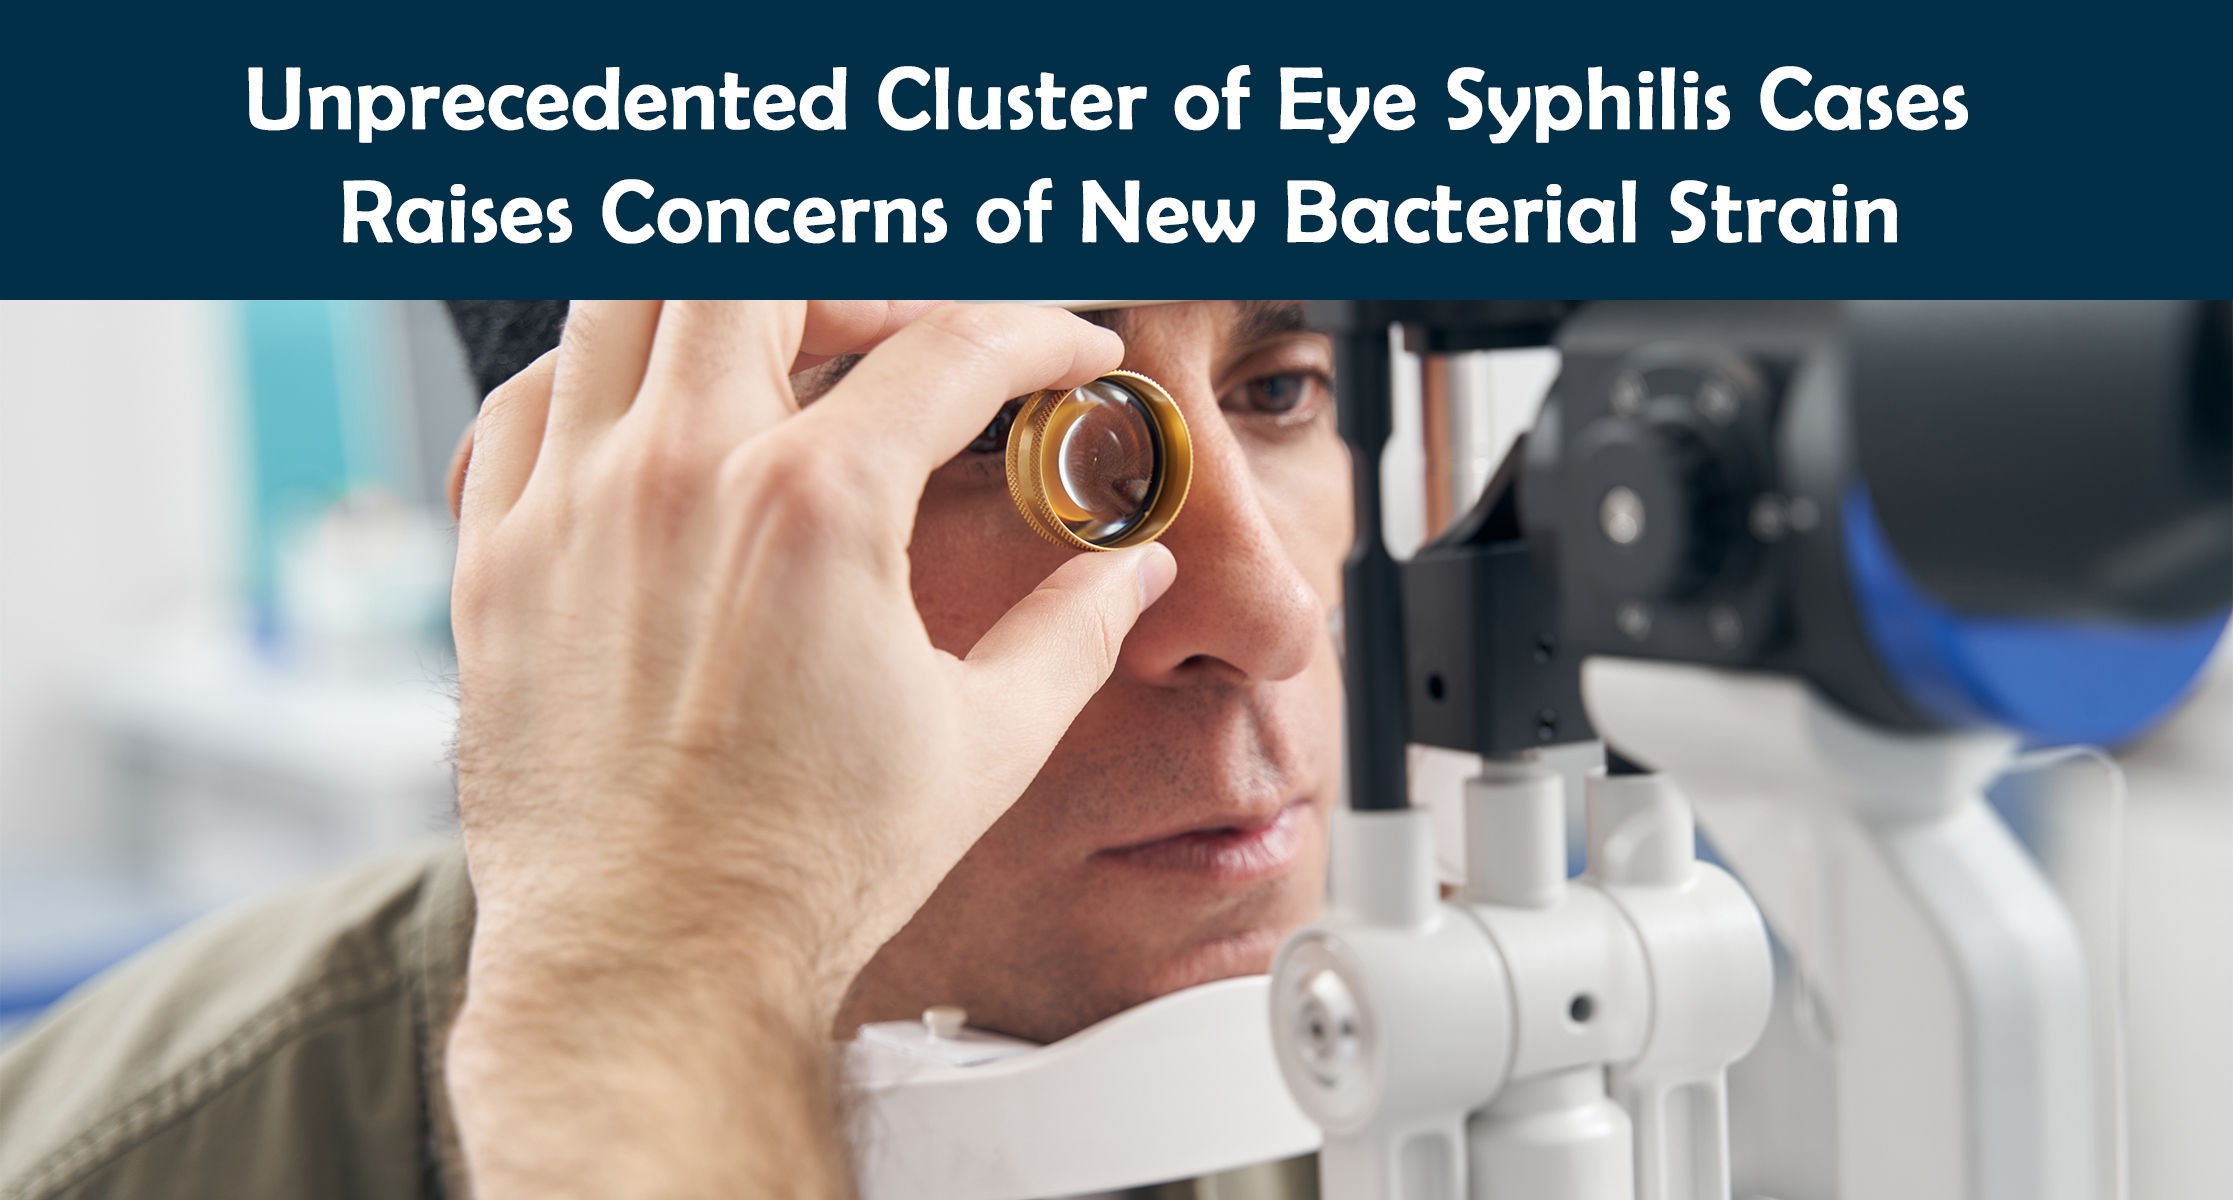 Unprecedented Cluster of Eye Syphilis Cases Raises Concerns of New Bacterial Strain